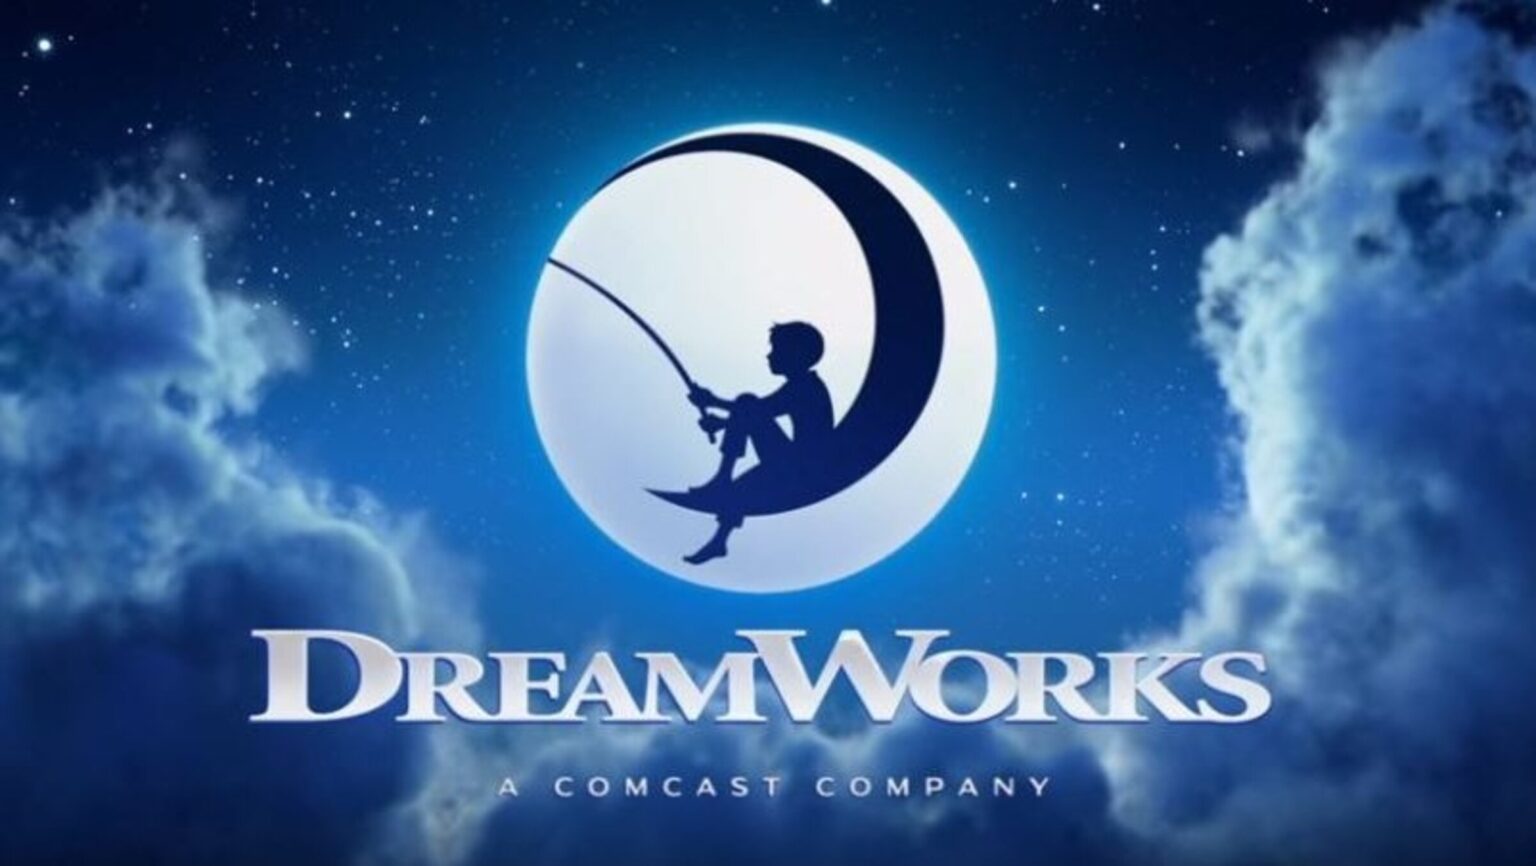 Among all the great animations out there, there still remain a select few that are absolutely iconic. Honor the best Dreamworks movies here.